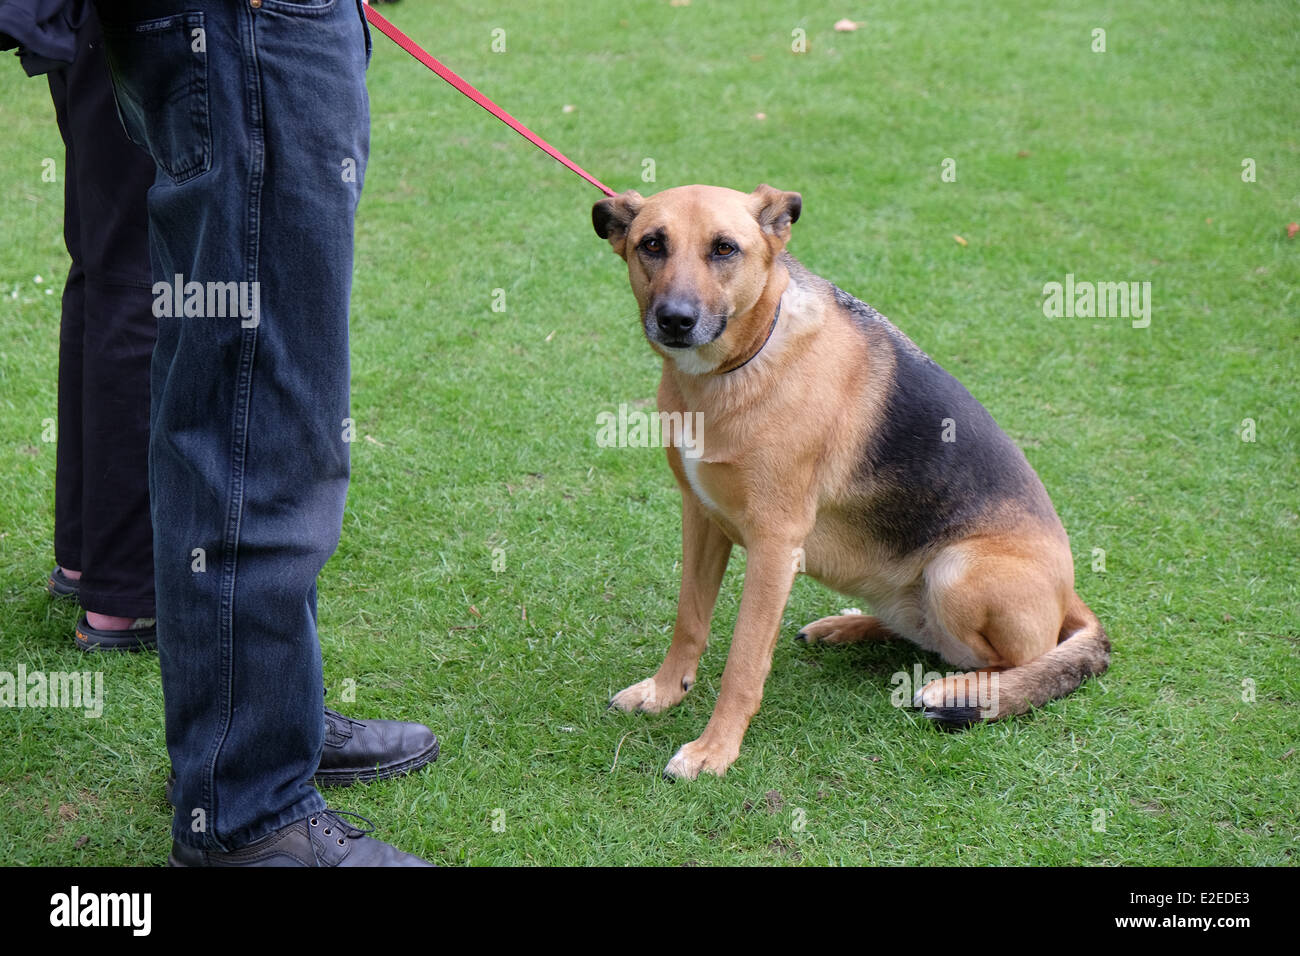 an obedient dog waiting for its owner. Stock Photo